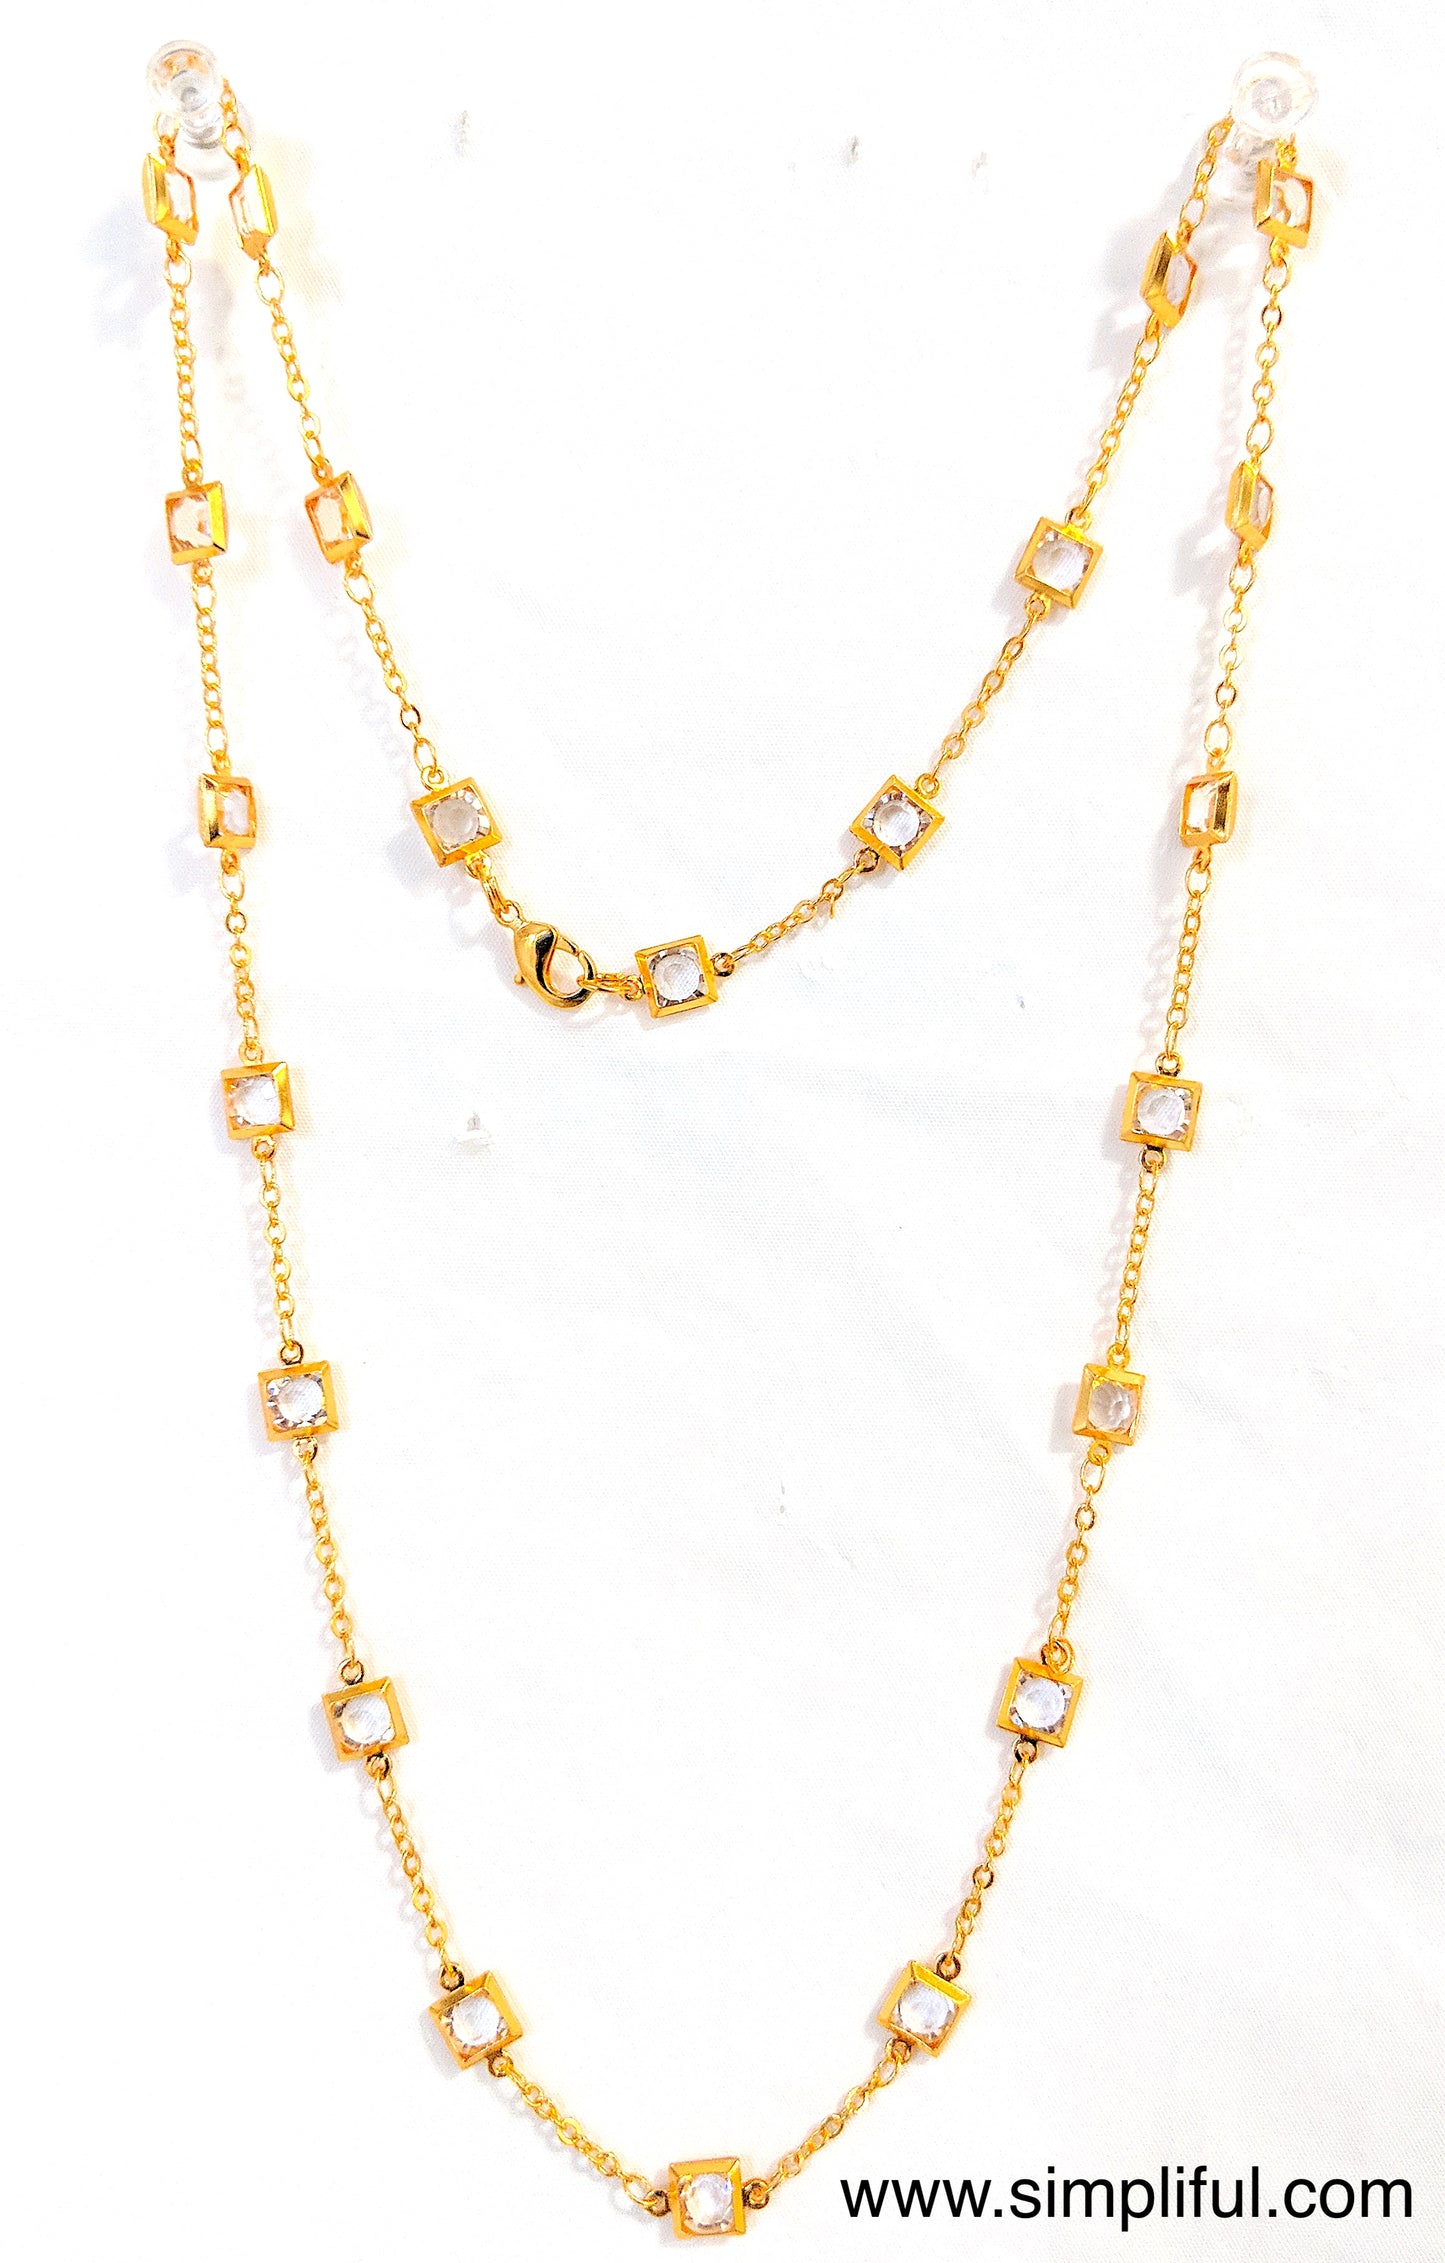 Square glass crystal stone bright gold plated chain Necklace - Simpliful